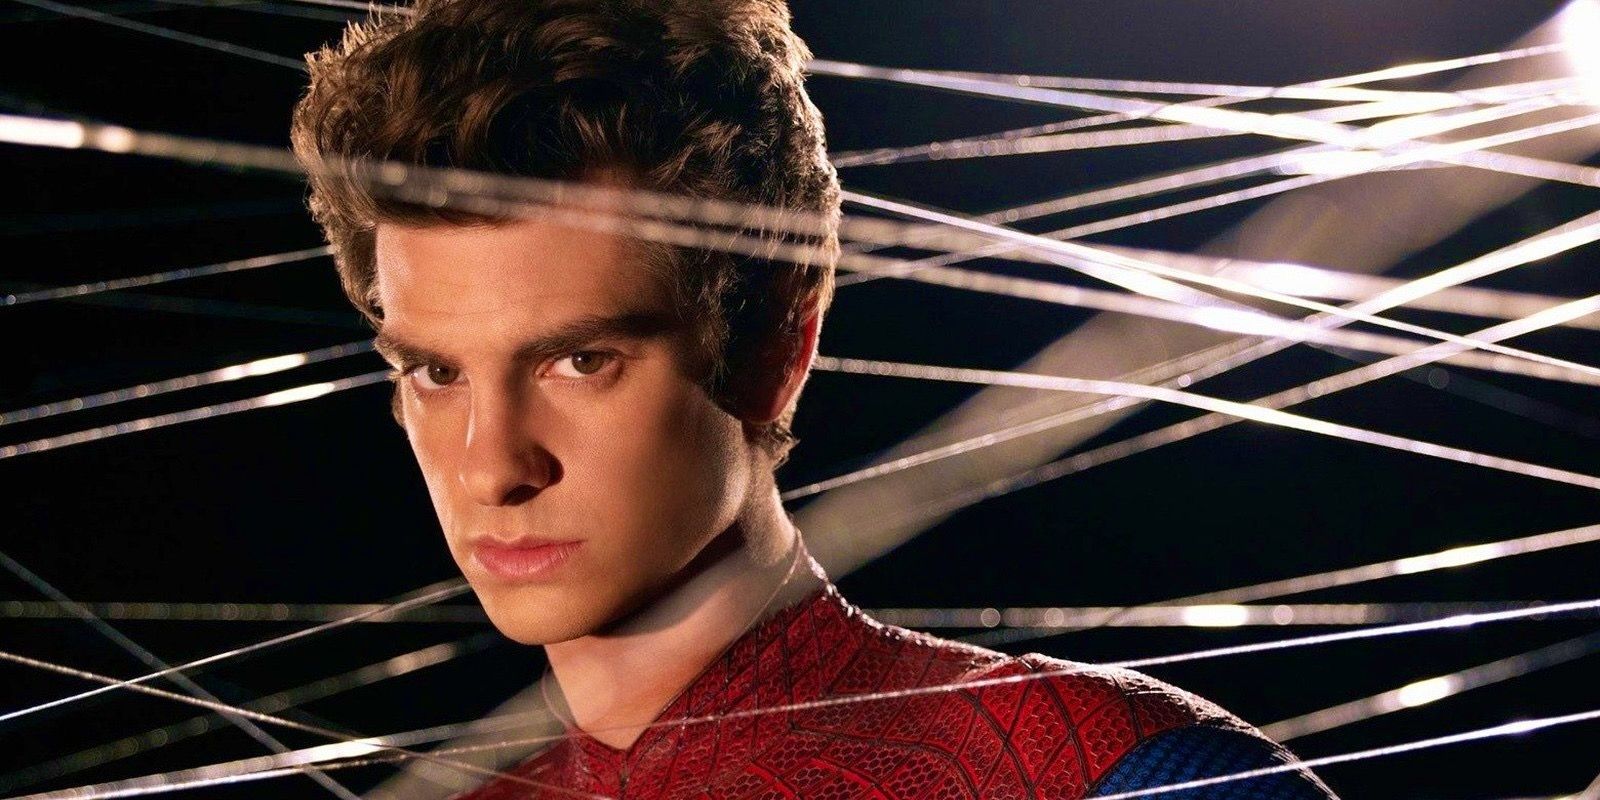 Andrew Garfield looks through webs as Spider-Man from The Amazing Spider-Man